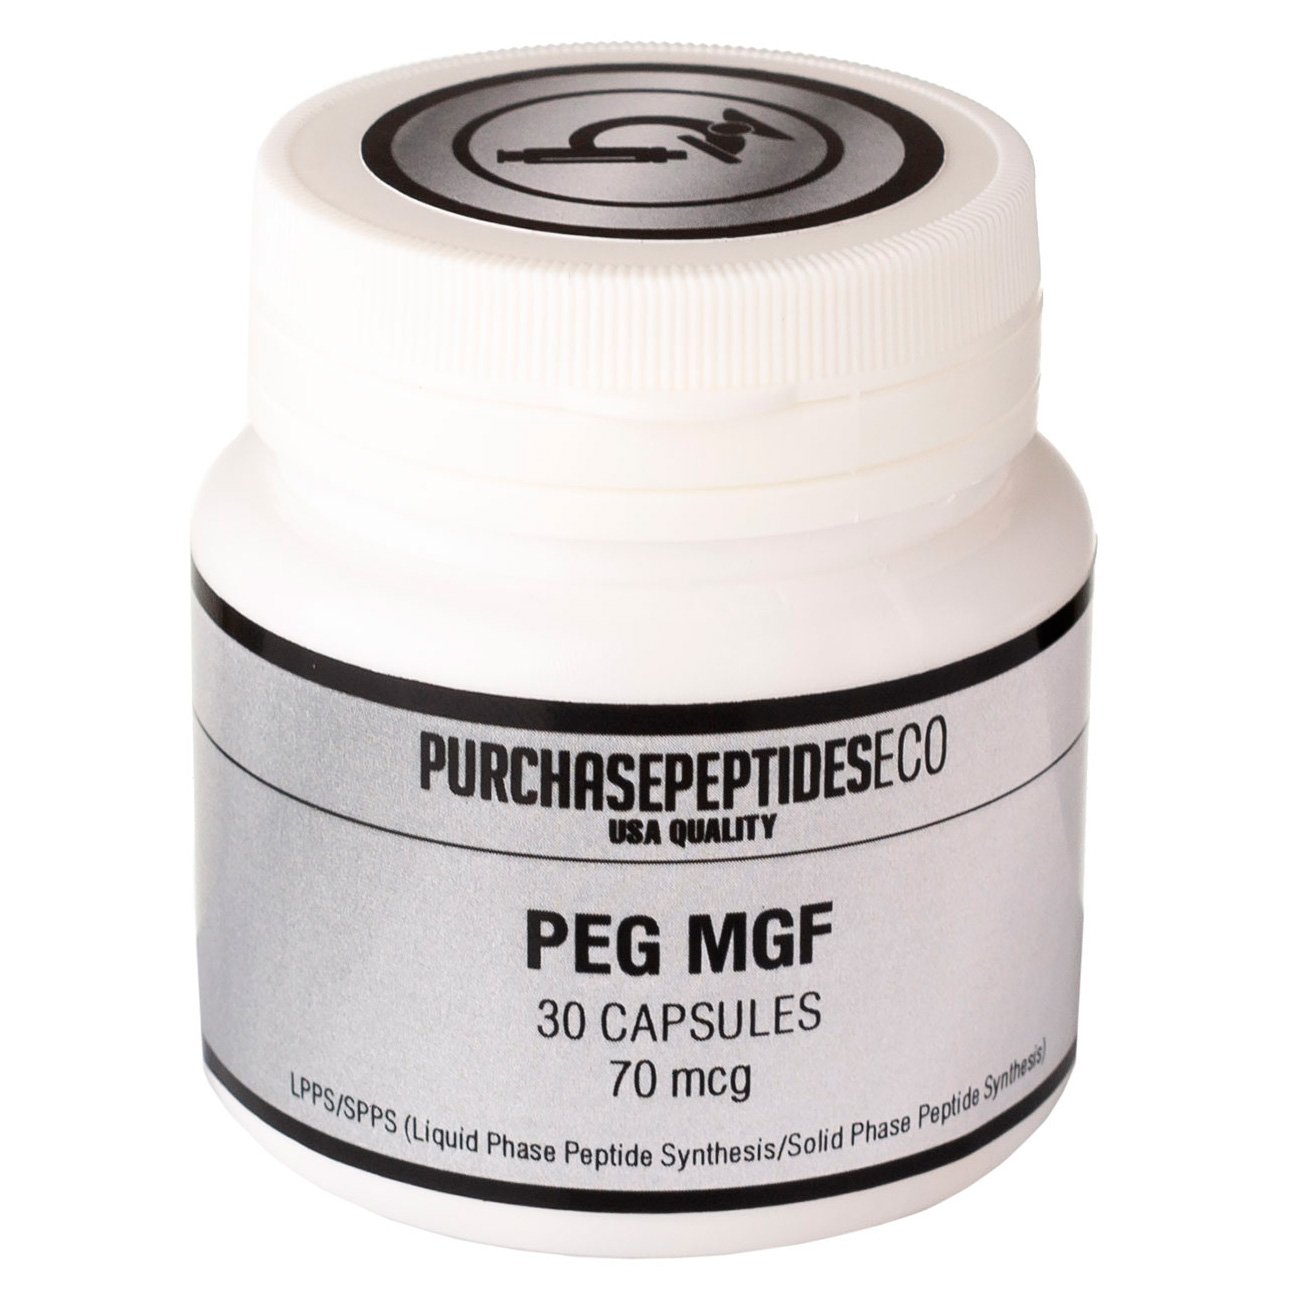 PEG MGF капсулы,  мл, PurchasepeptidesEco. Пептиды. 